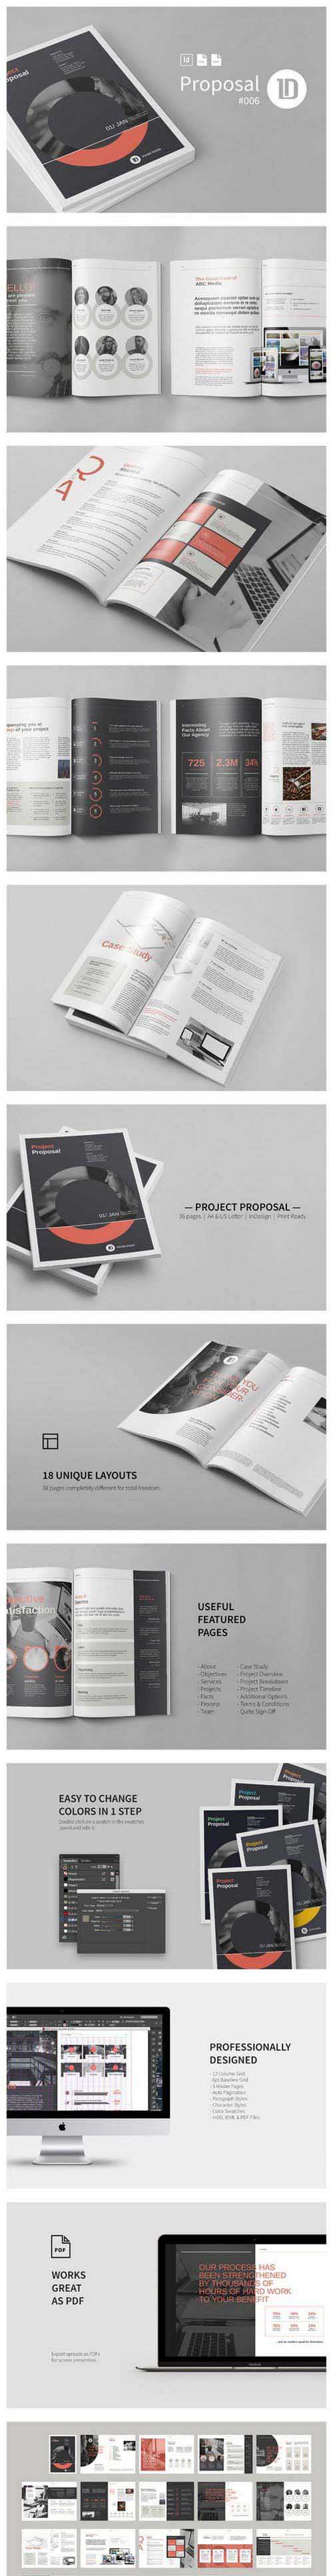 Project Proposal Template 006 880762